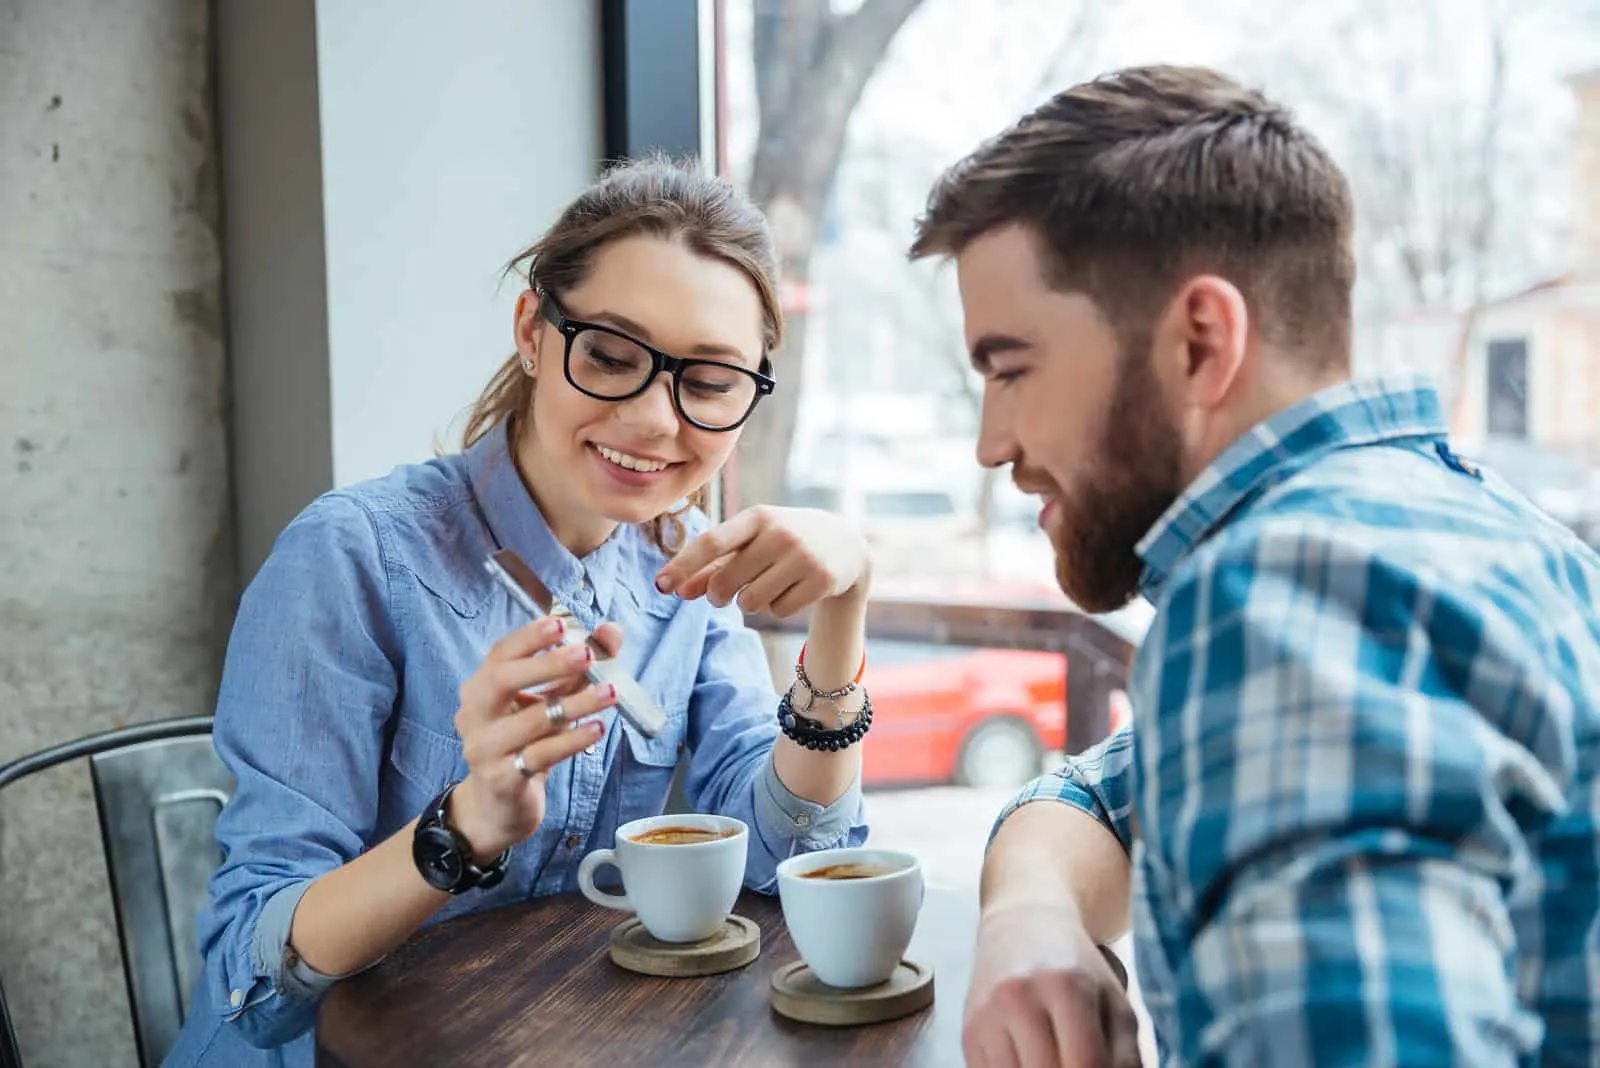 Happy couple using smartphone together and drinking coffee in cafe